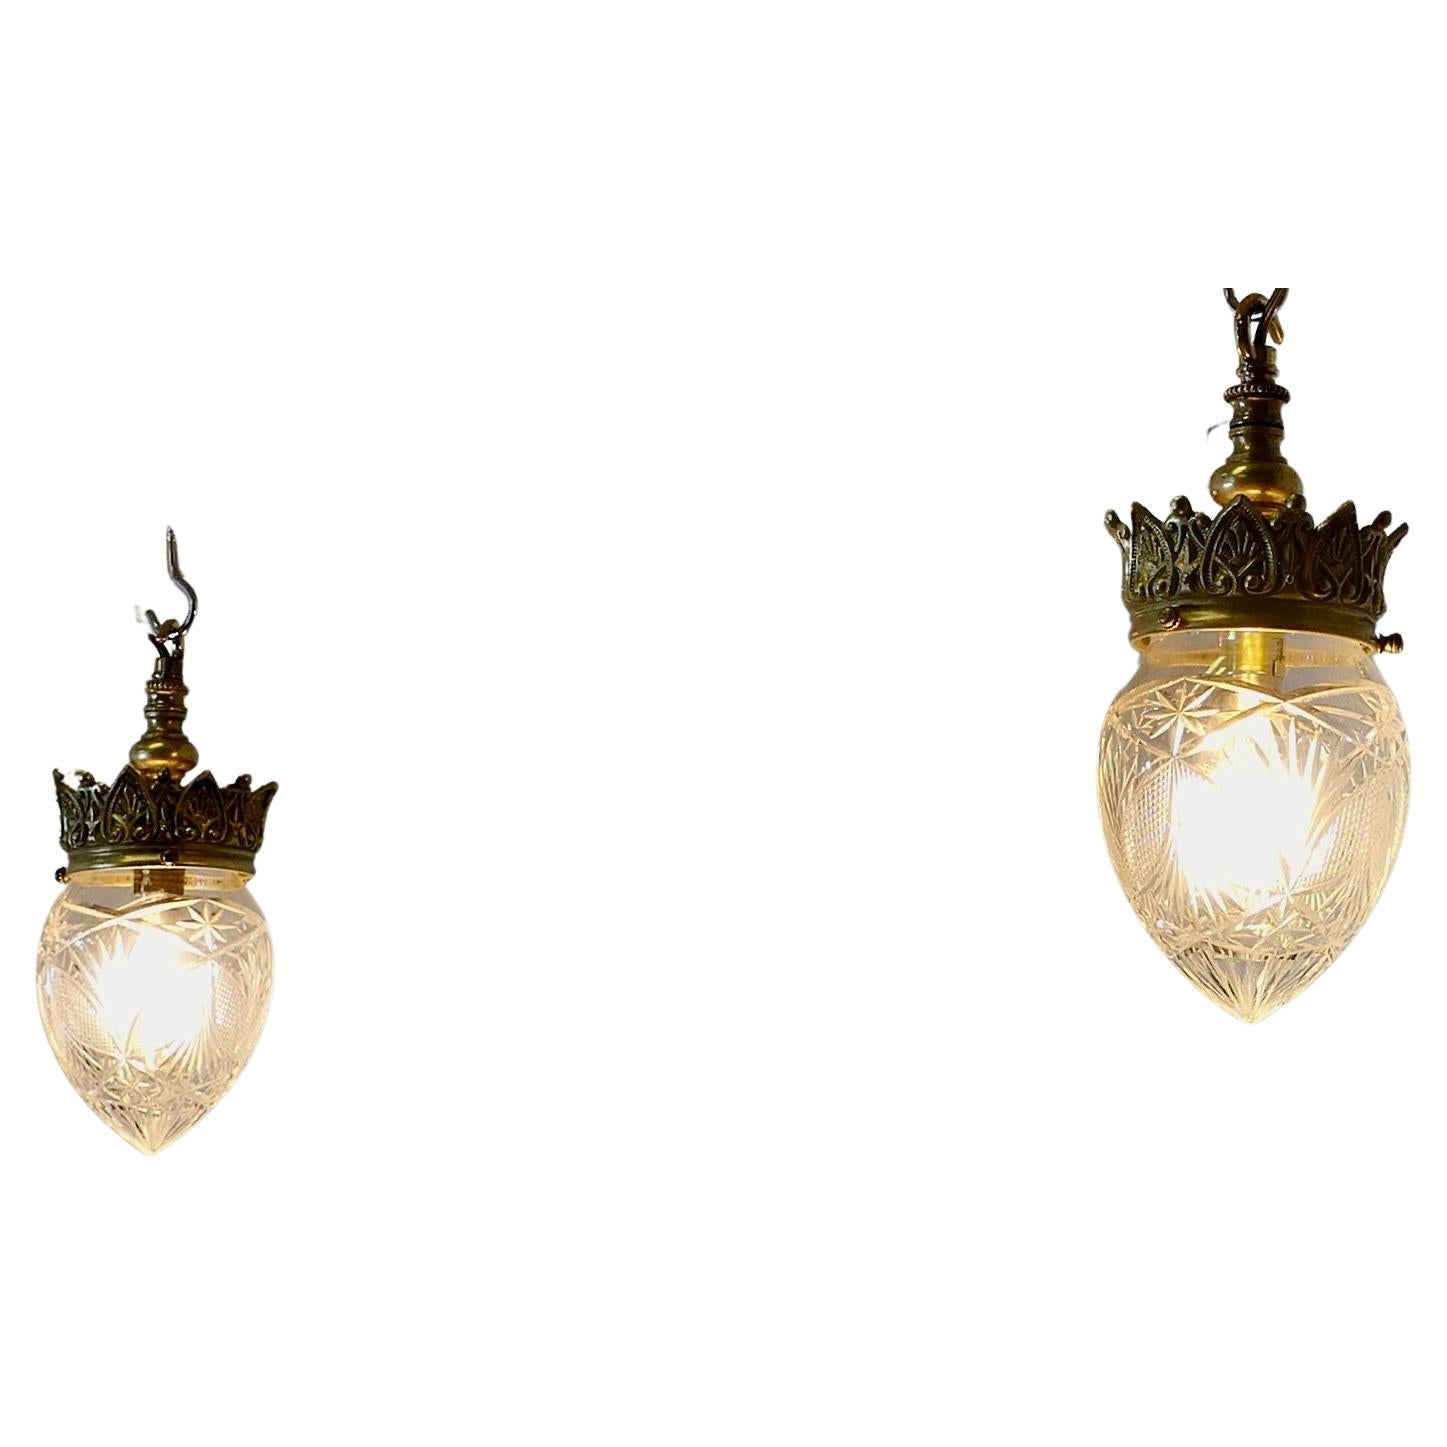  A Pair of Victorian Arts and Crafts Brass Ceiling Lights   